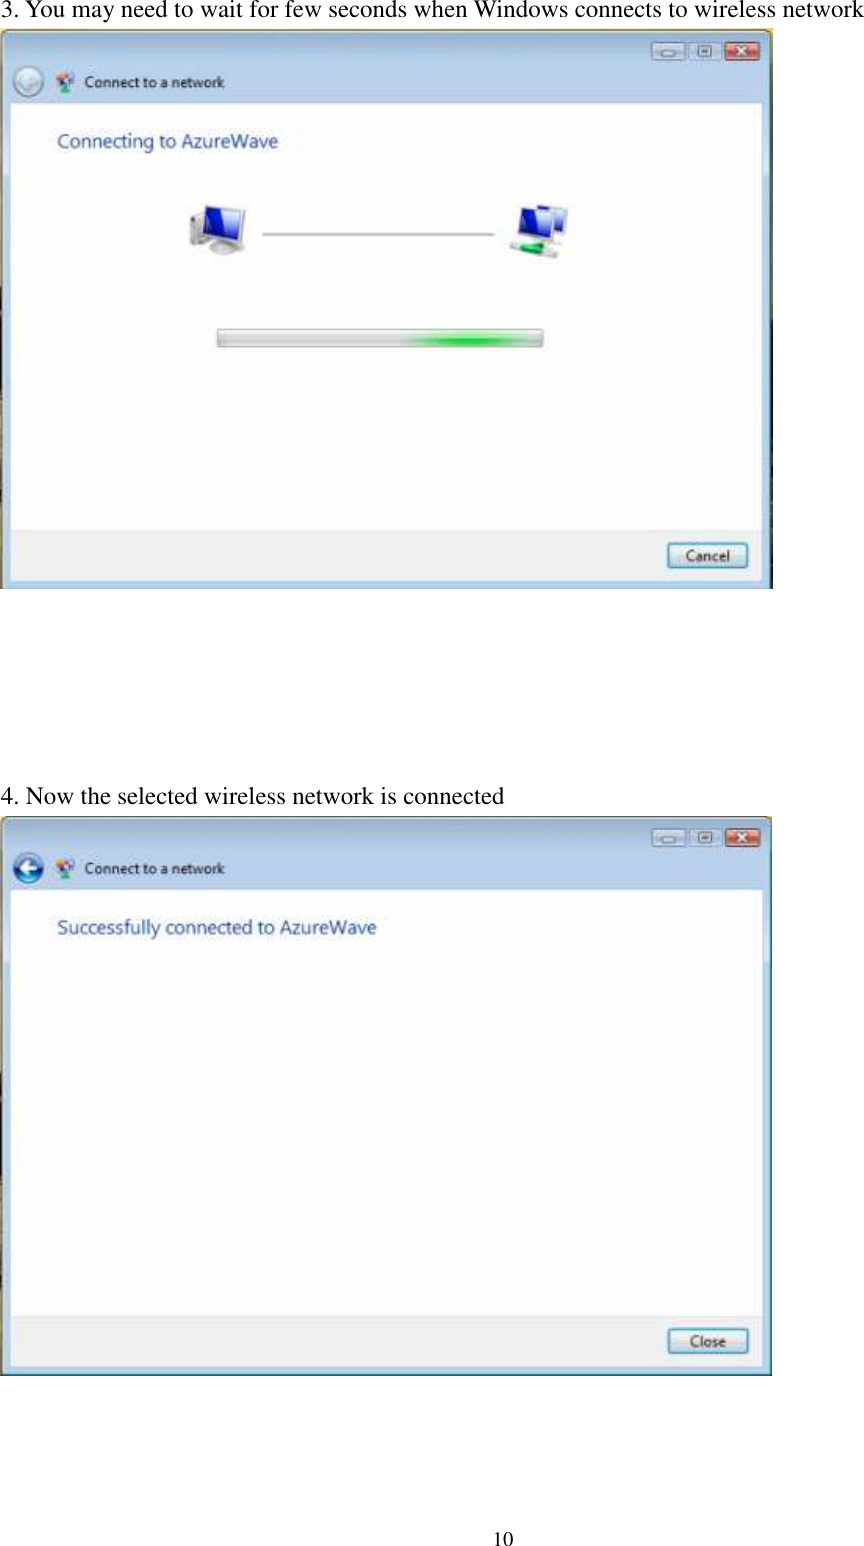   103. You may need to wait for few seconds when Windows connects to wireless network       4. Now the selected wireless network is connected      